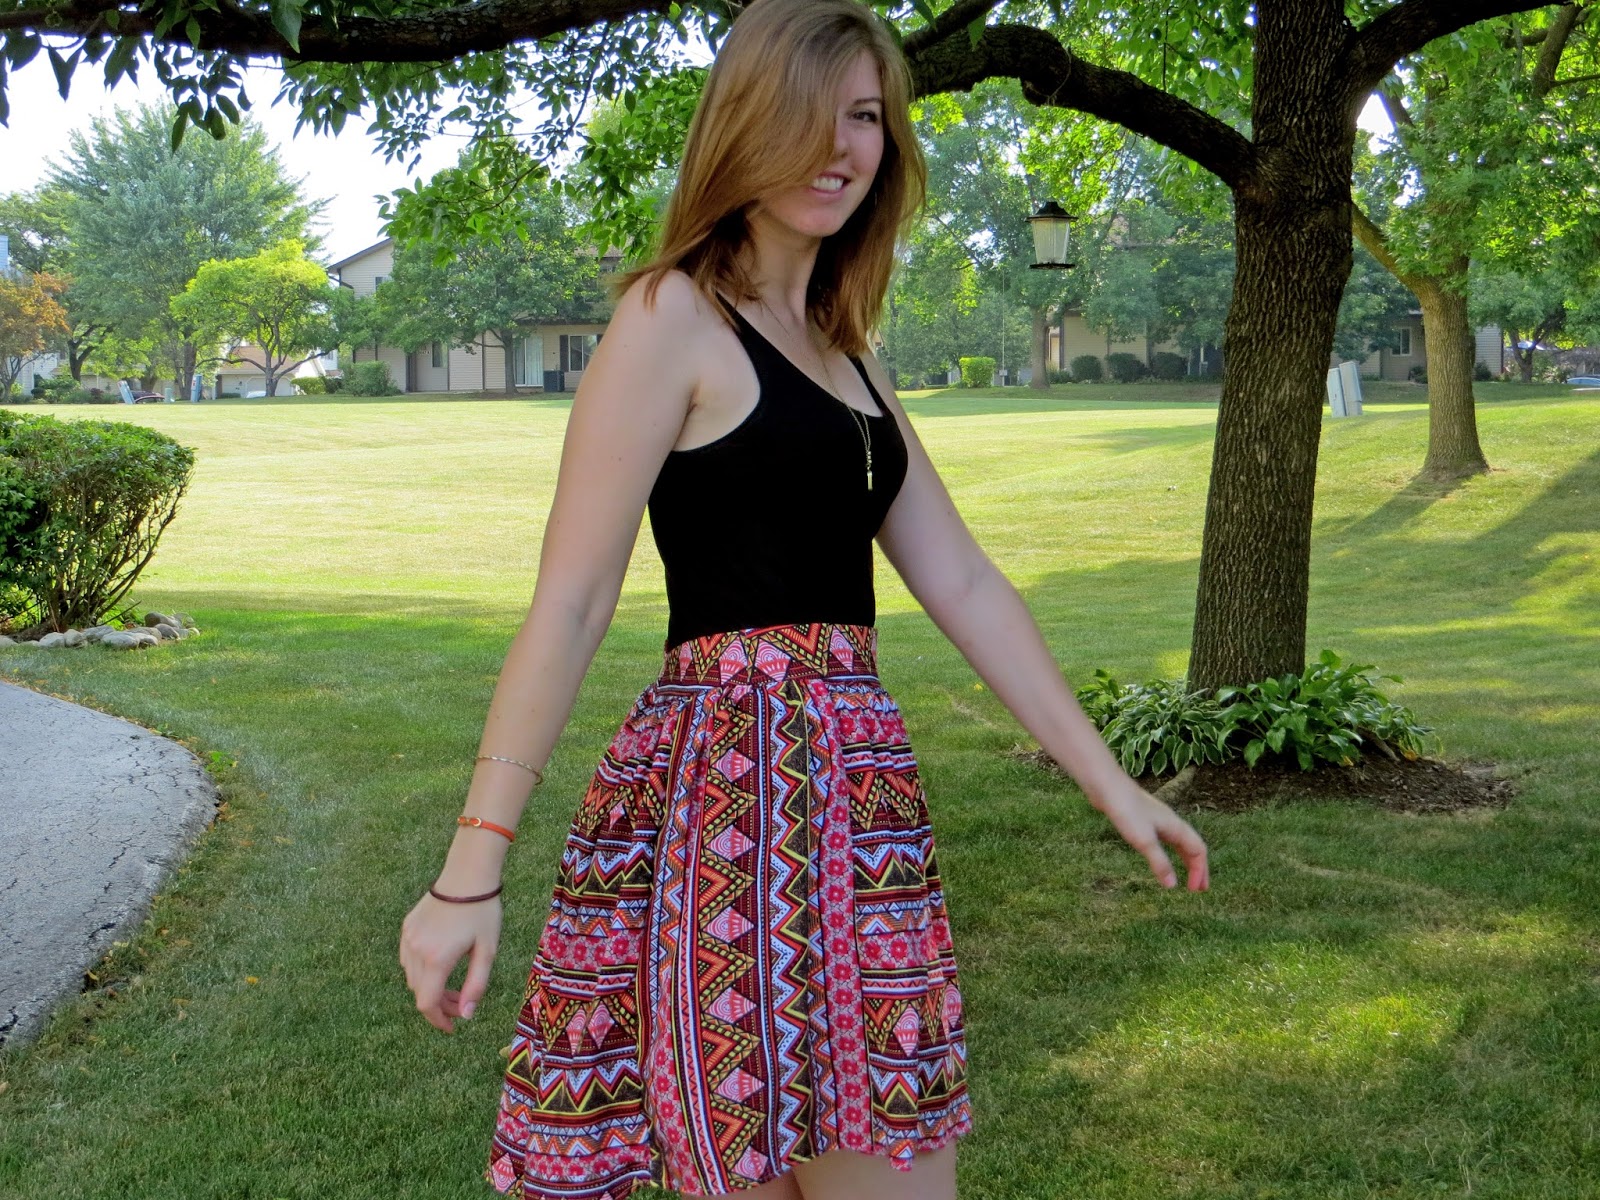 A Saucy Tribal Skirt — the quirky peach